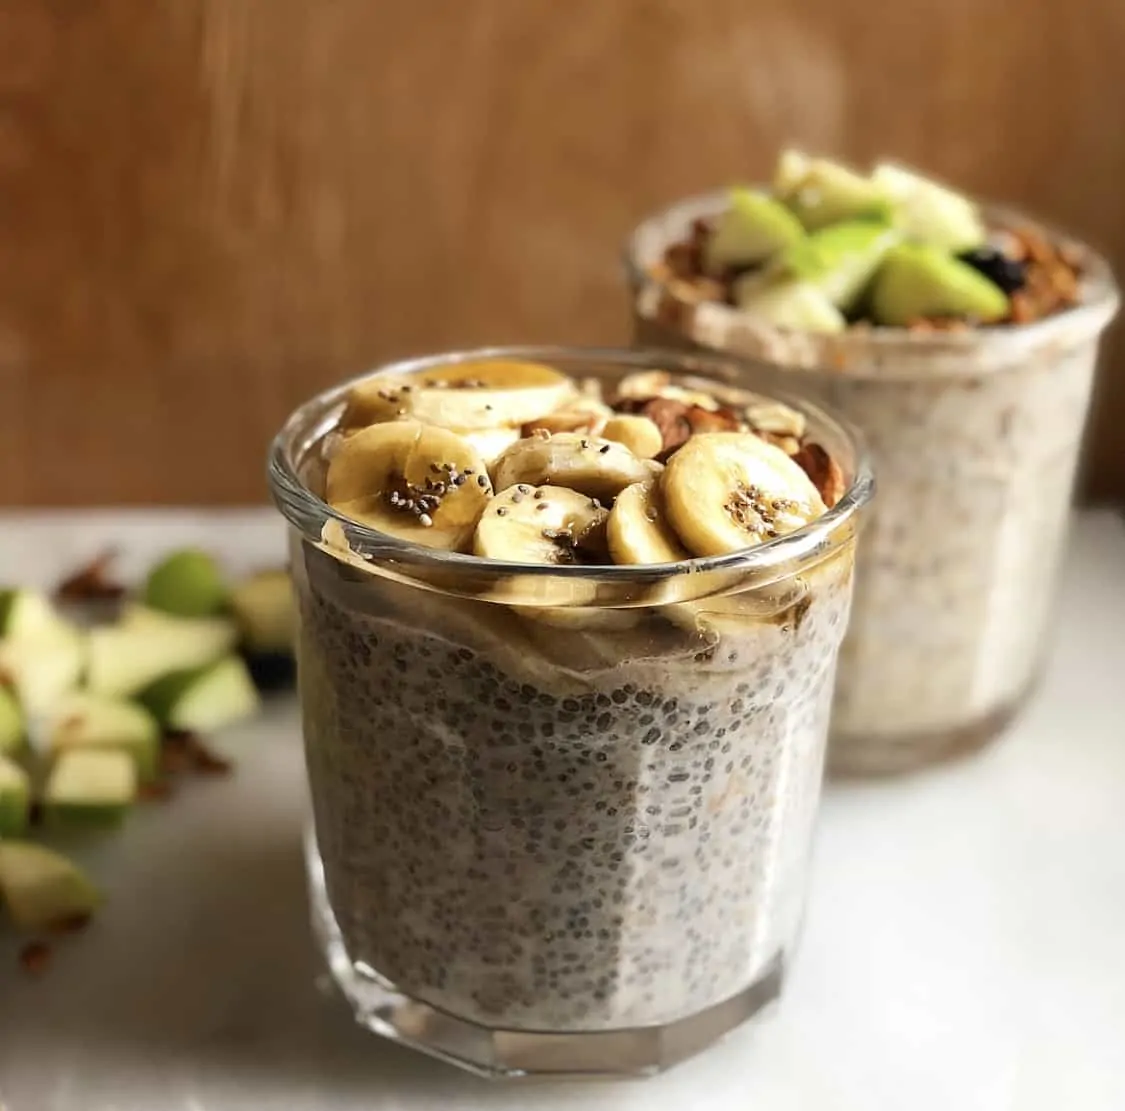 2 Easy & Healthy Breakfast Recipes | Chia Seed Pudding & Overnight Oats